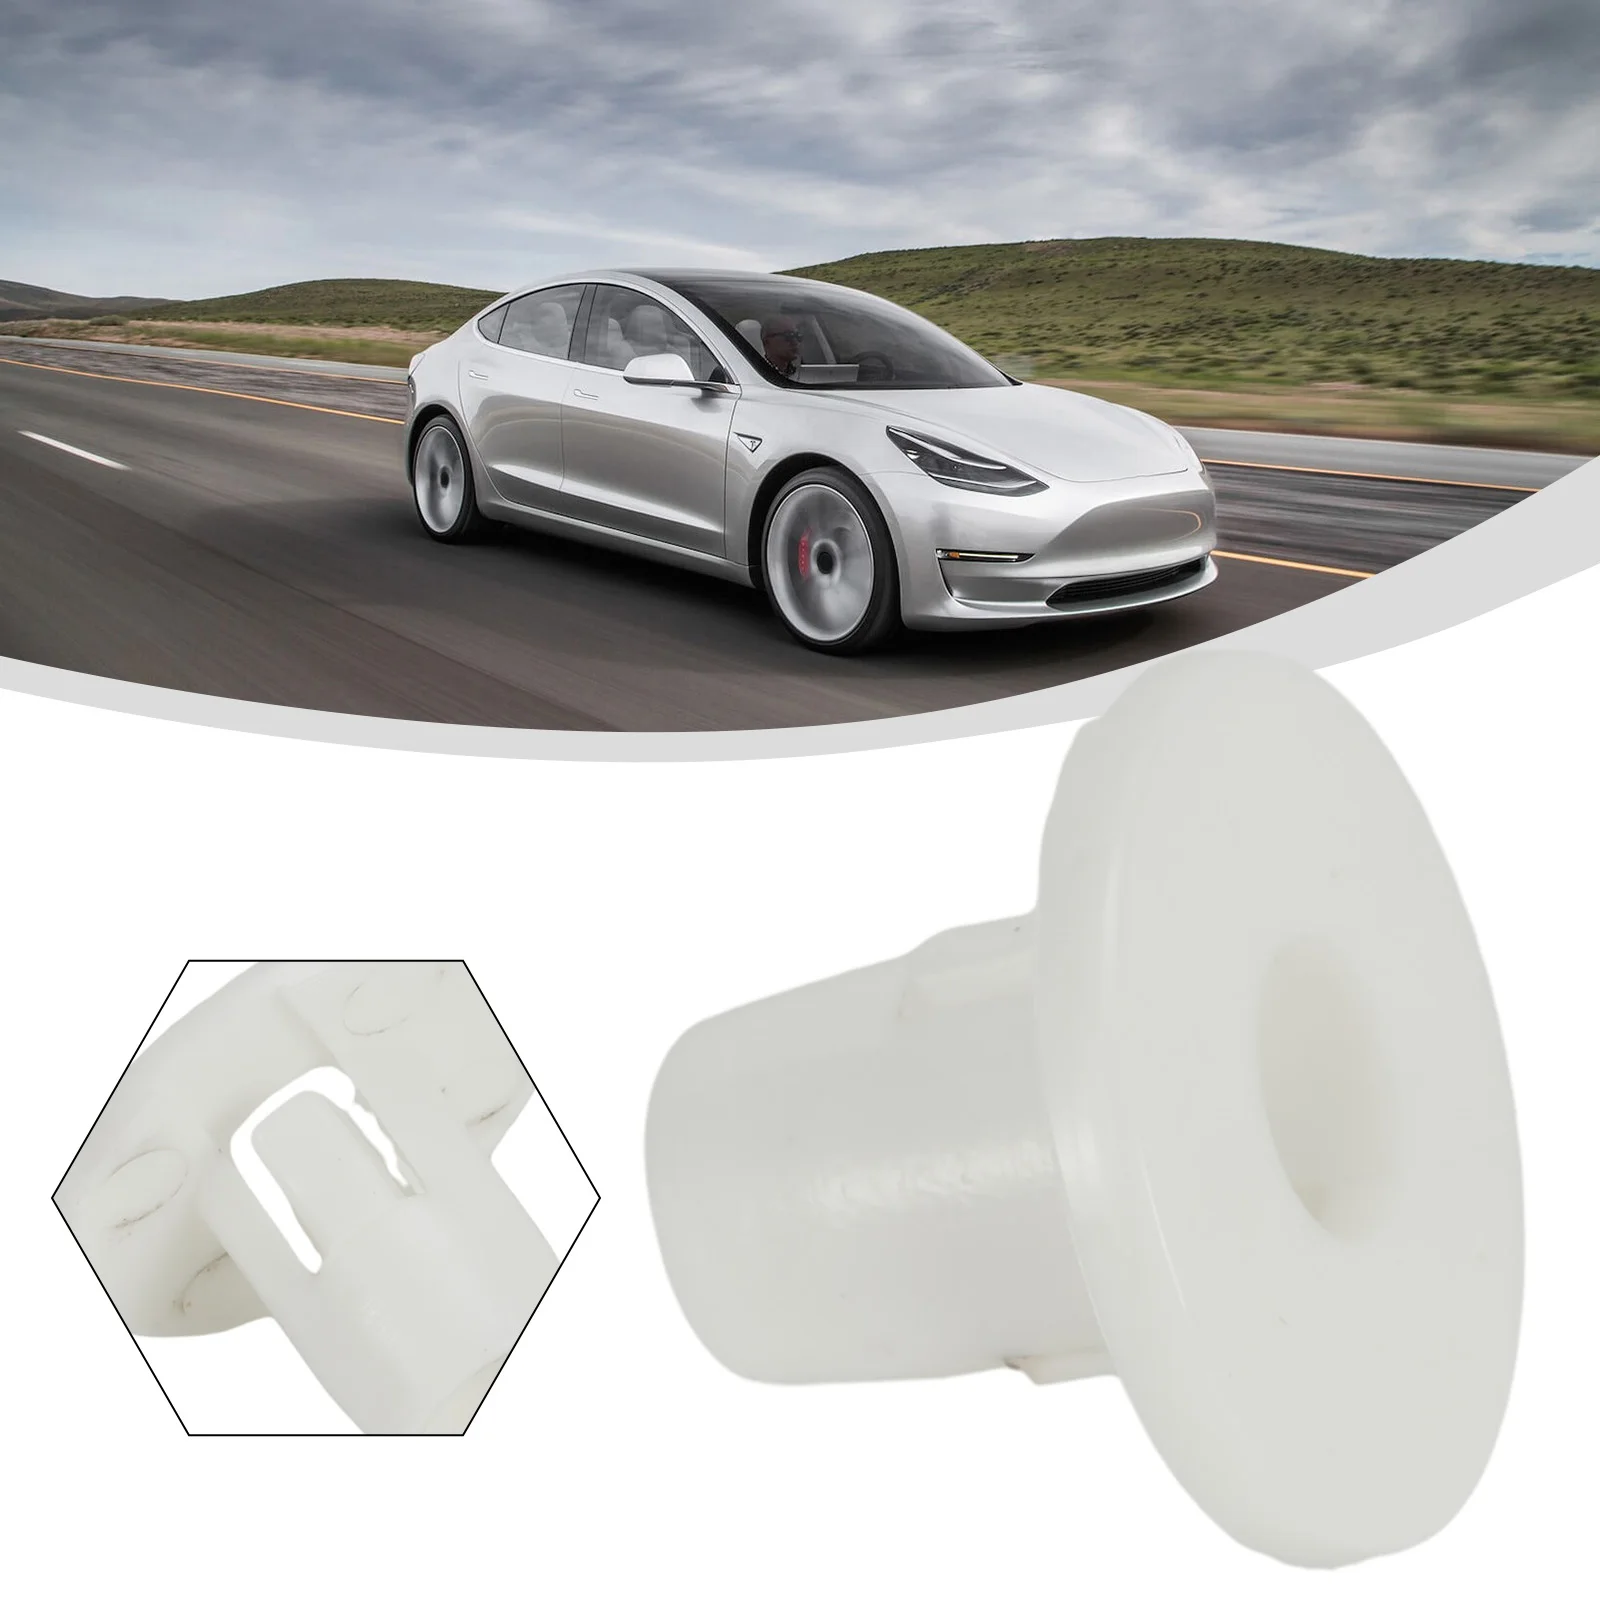 Stud Grommet Clip Buckle Rubber White 1473202-00-A Headlight Rear For Tesla Model 3/ Y Brand New Durable High Quality